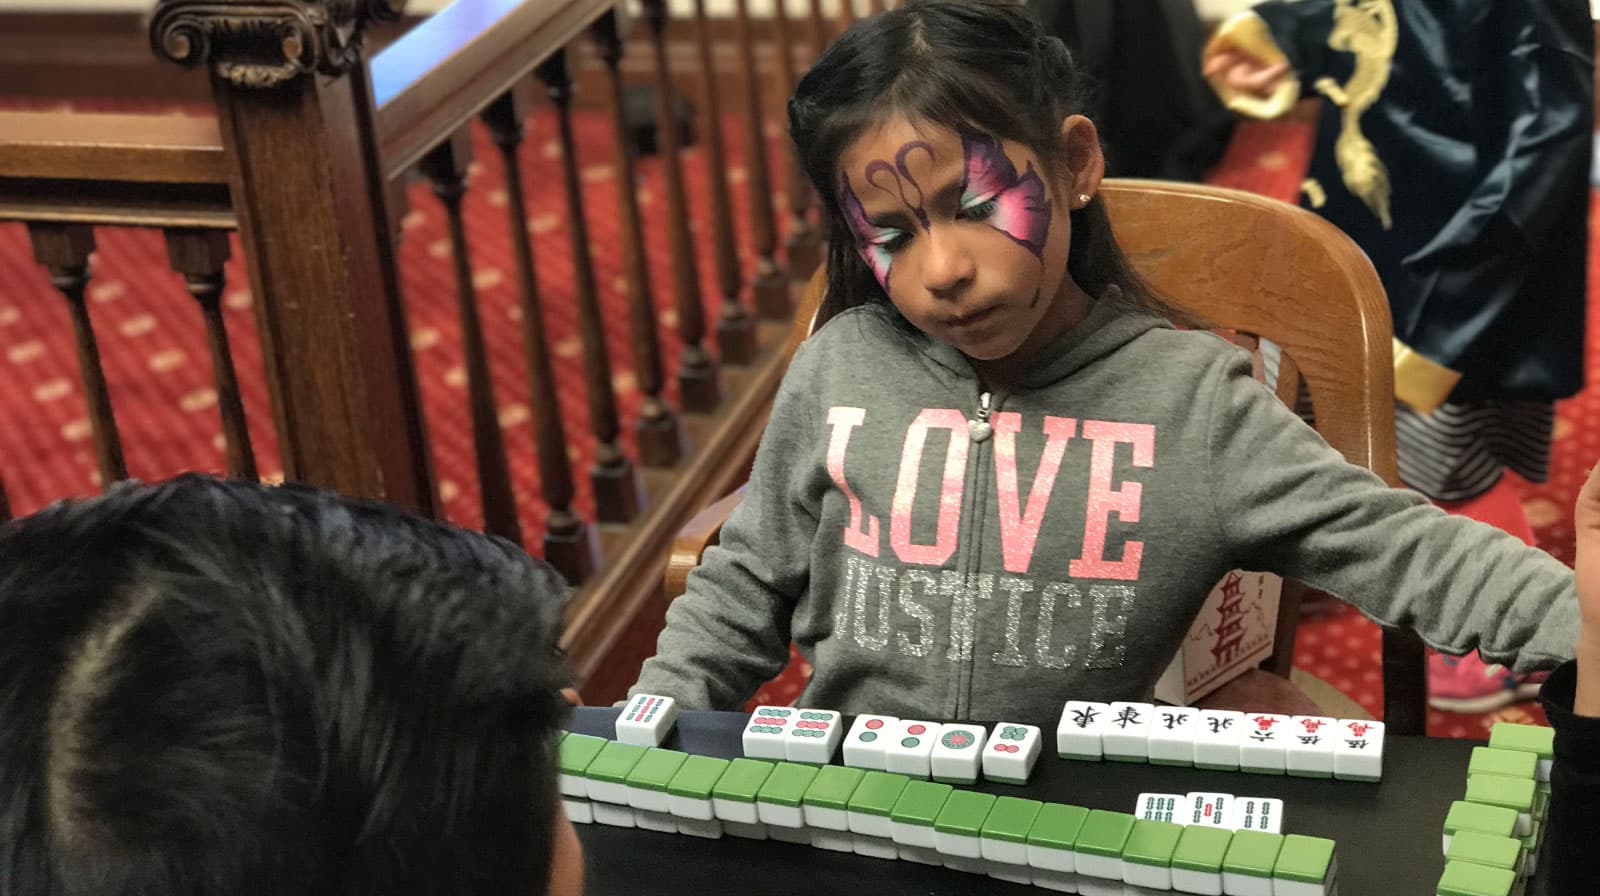 A young girl with butterfly face paint learns mahjong at the lunar new year celebration at the San Mateo County History Museum